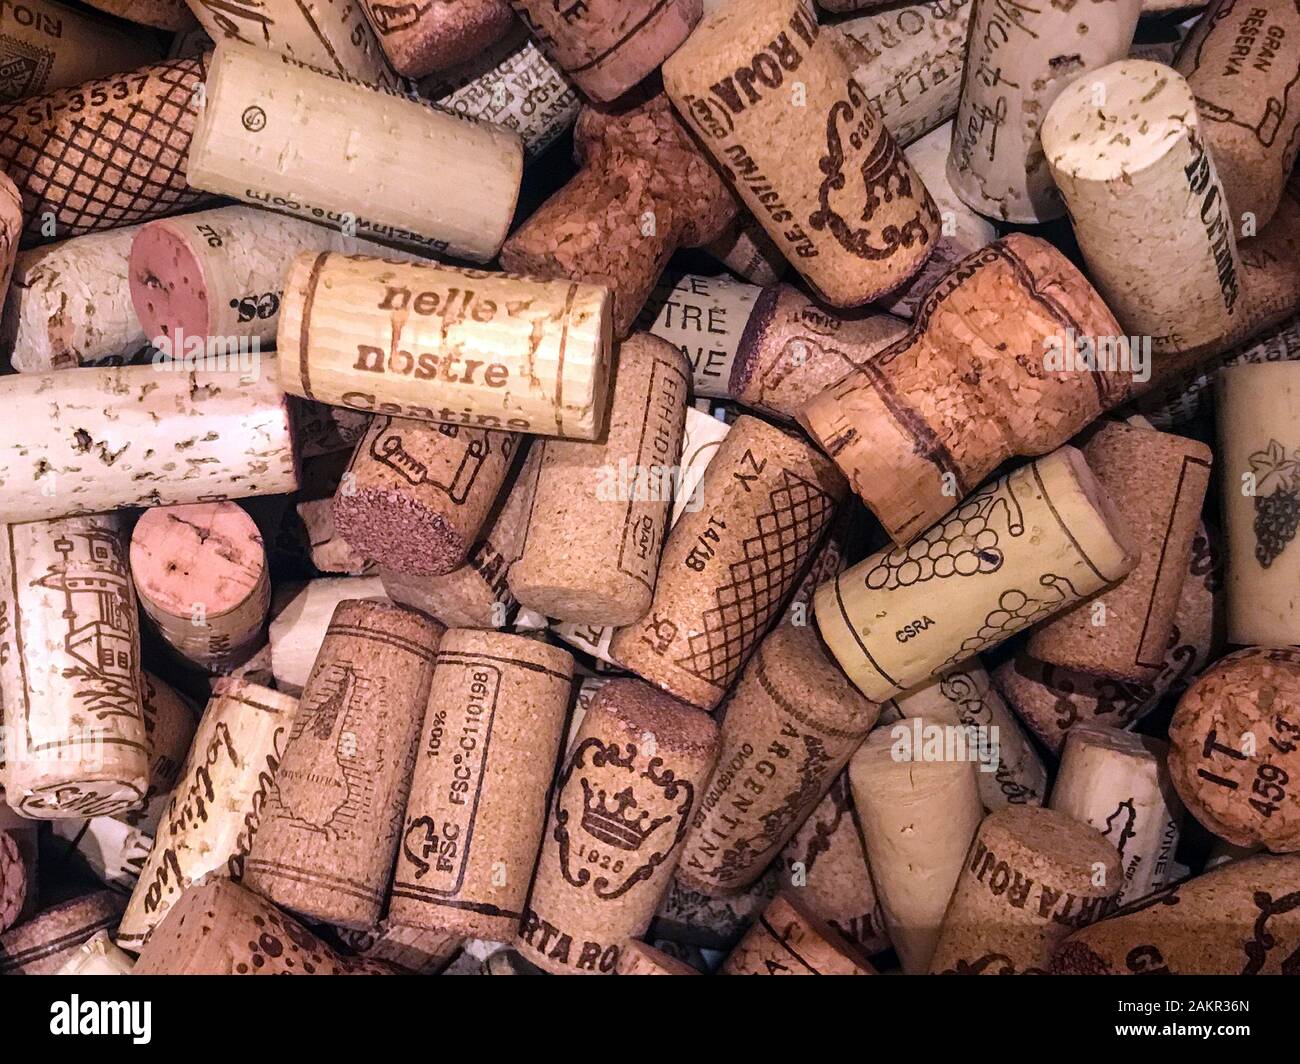 A close up view of a collection of used wine corks. Stock Photo